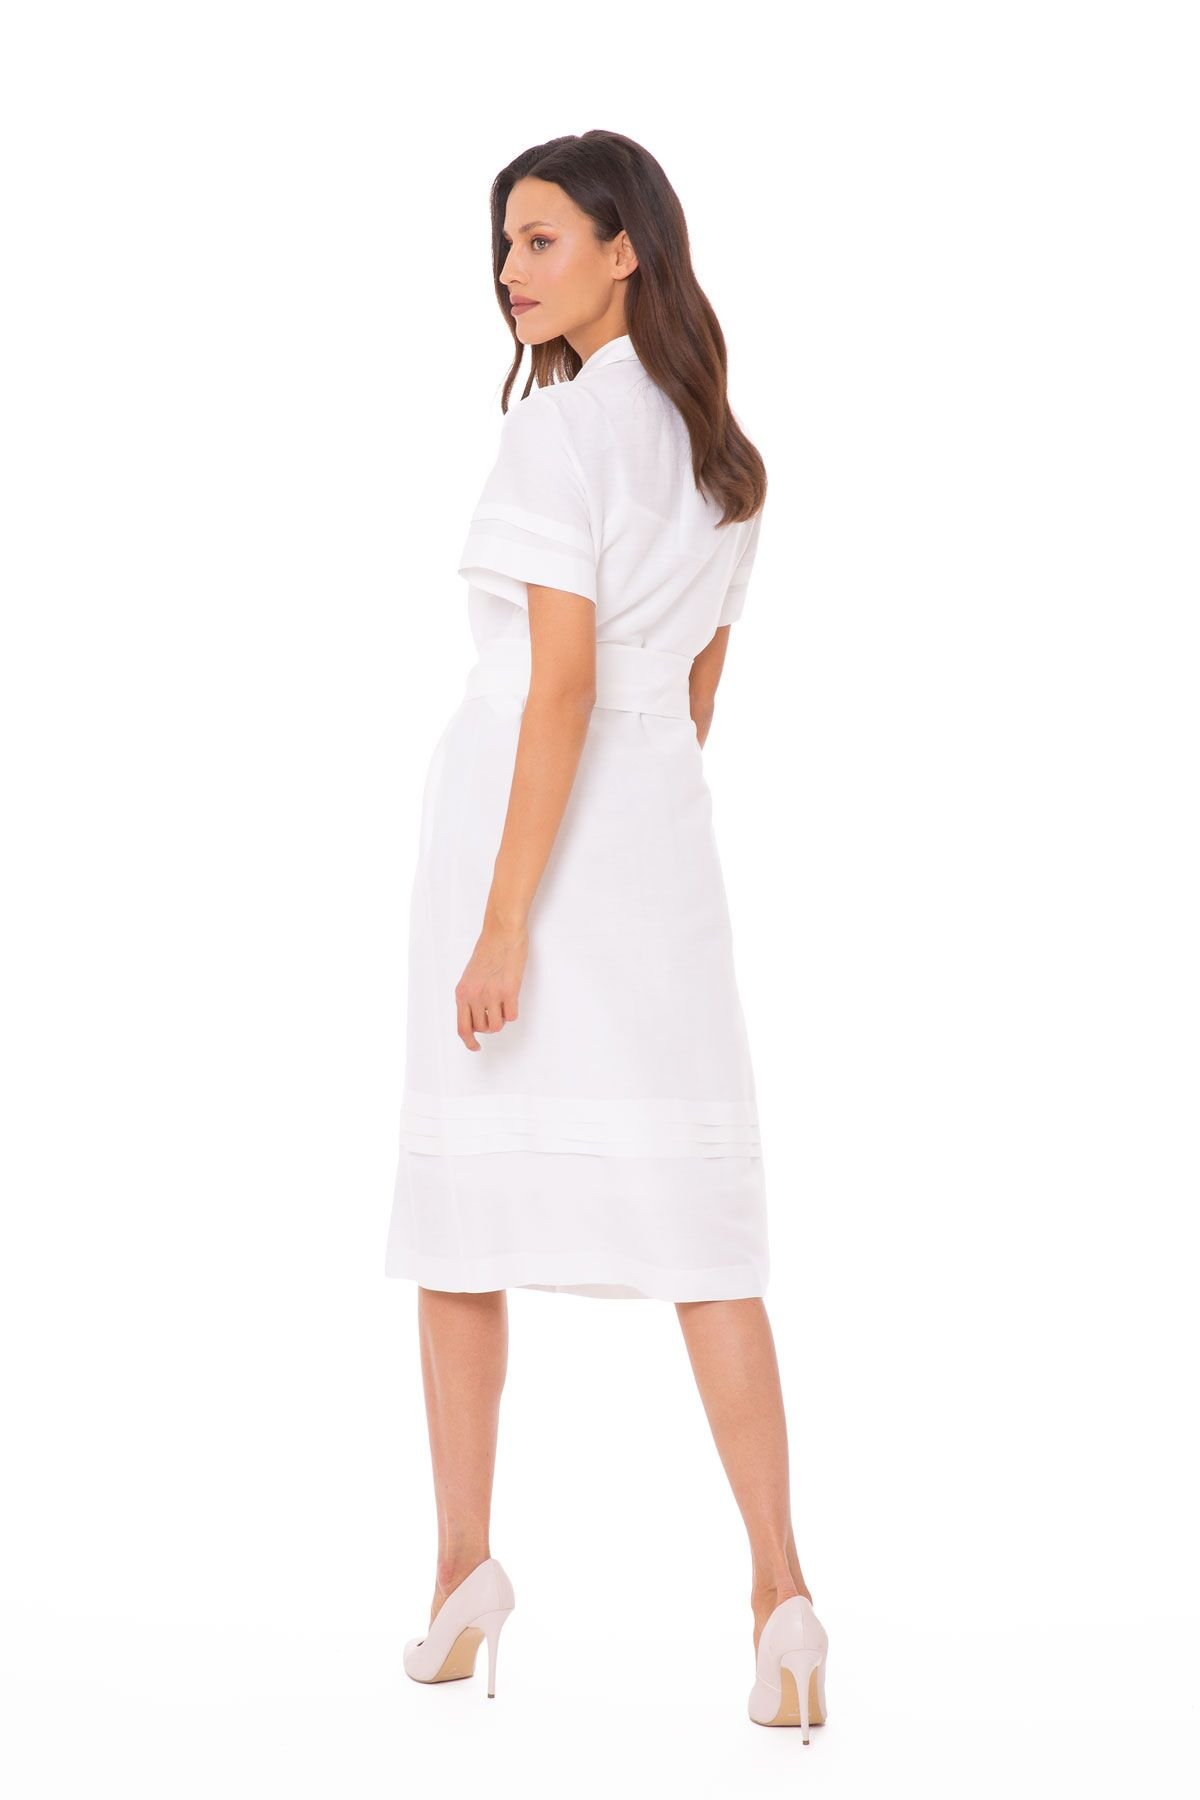 Belted Button Midi Dress